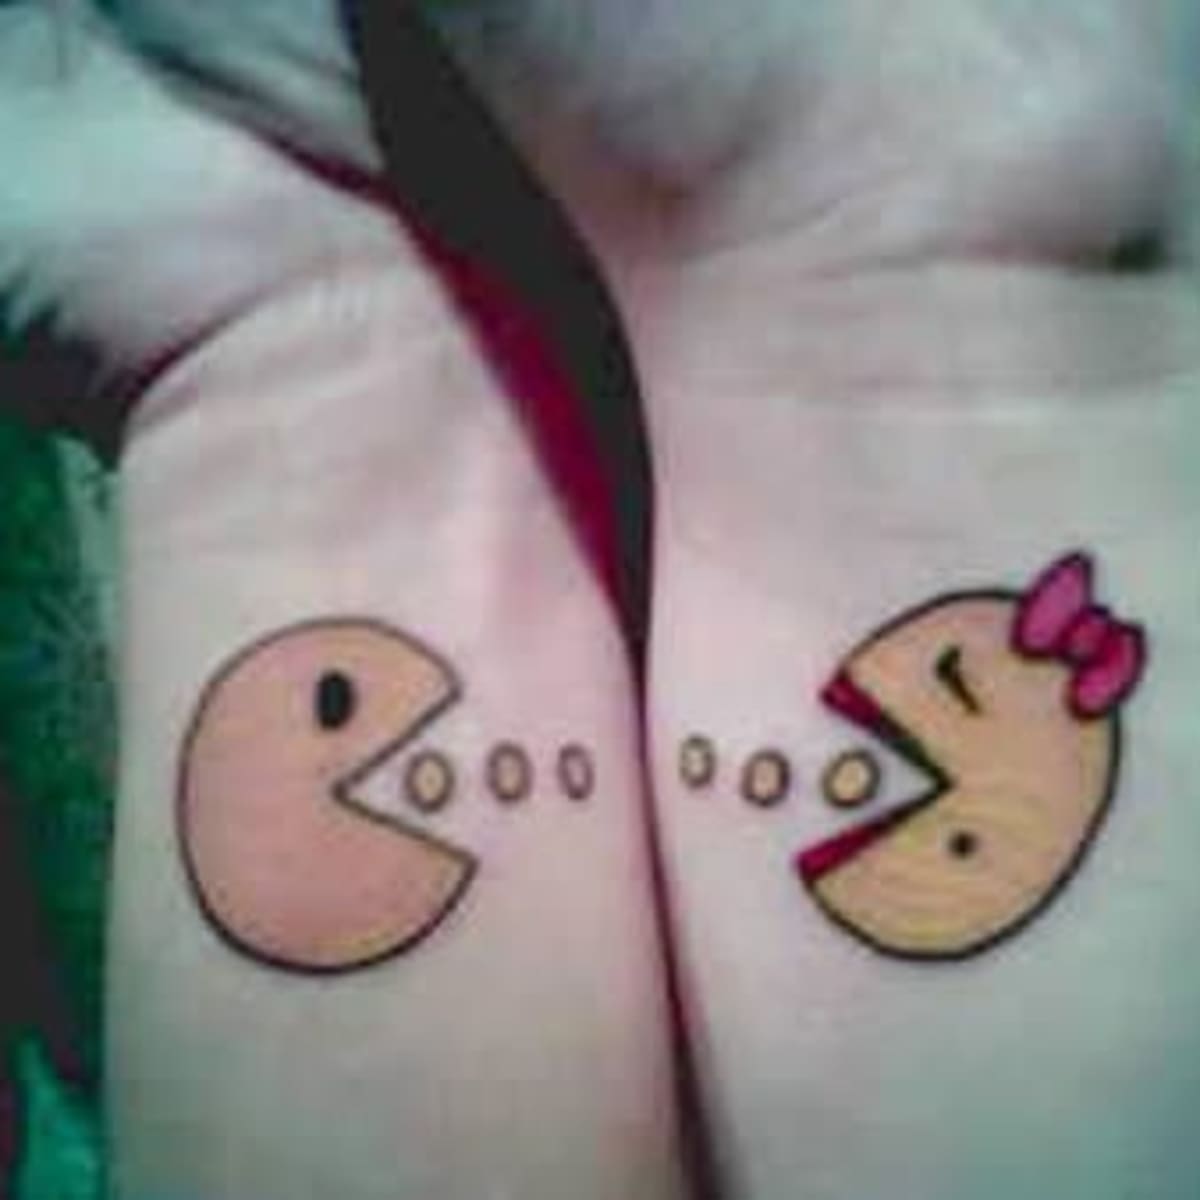 20 Unique Couple Tattoos For All The Lovers Out There